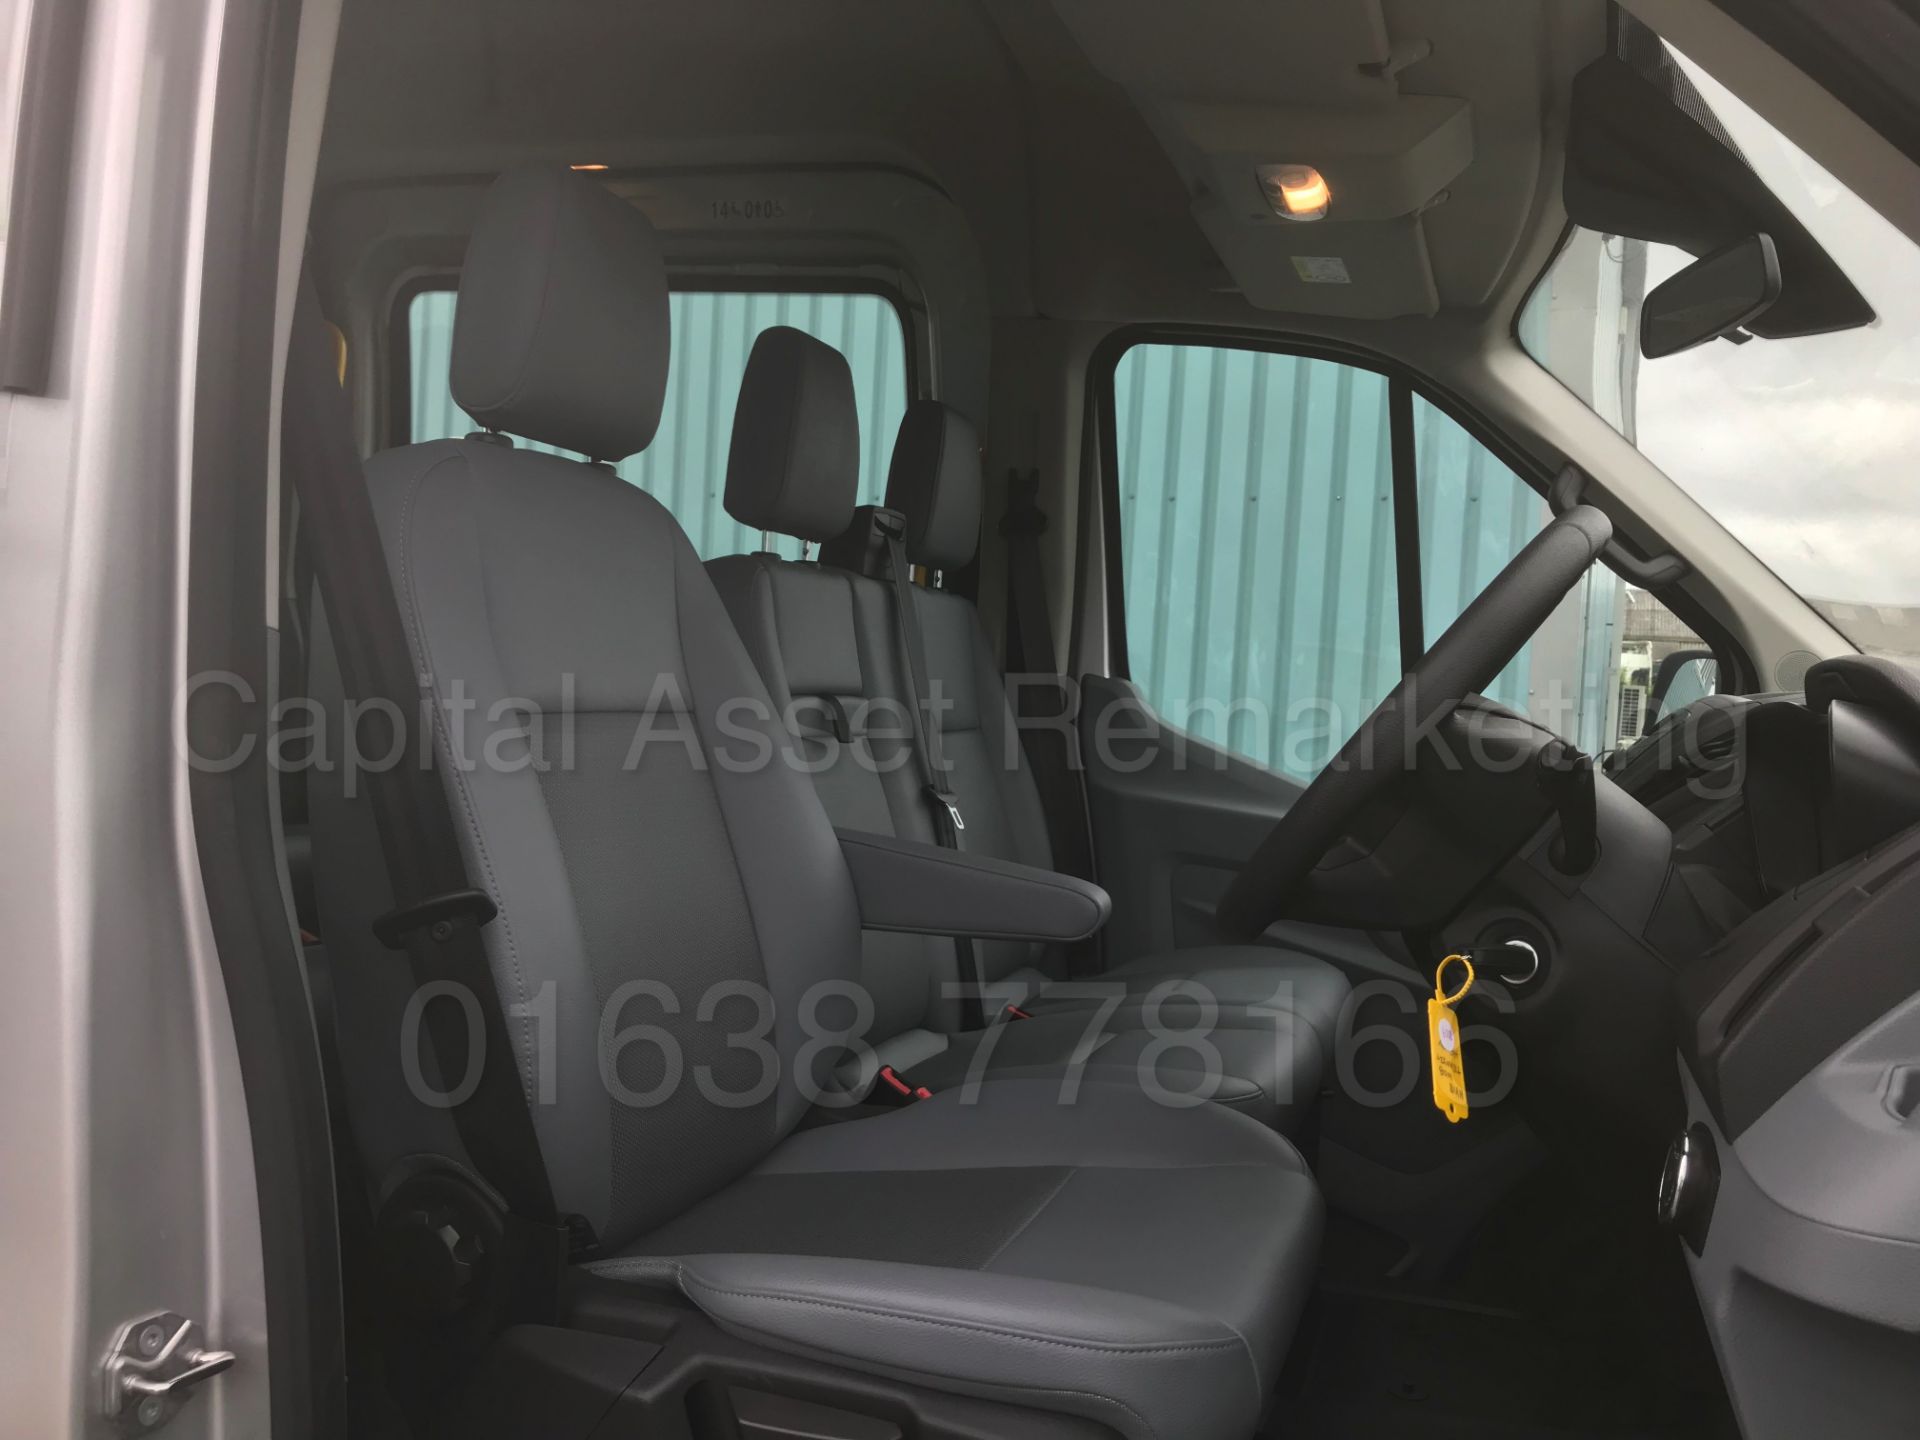 (On Sale) FORD TRANSIT LWB '15 SEATER MINI-BUS' (2018) '2.2 TDCI -125 BHP- 6 SPEED' 130 MILES ONLY ! - Image 34 of 50